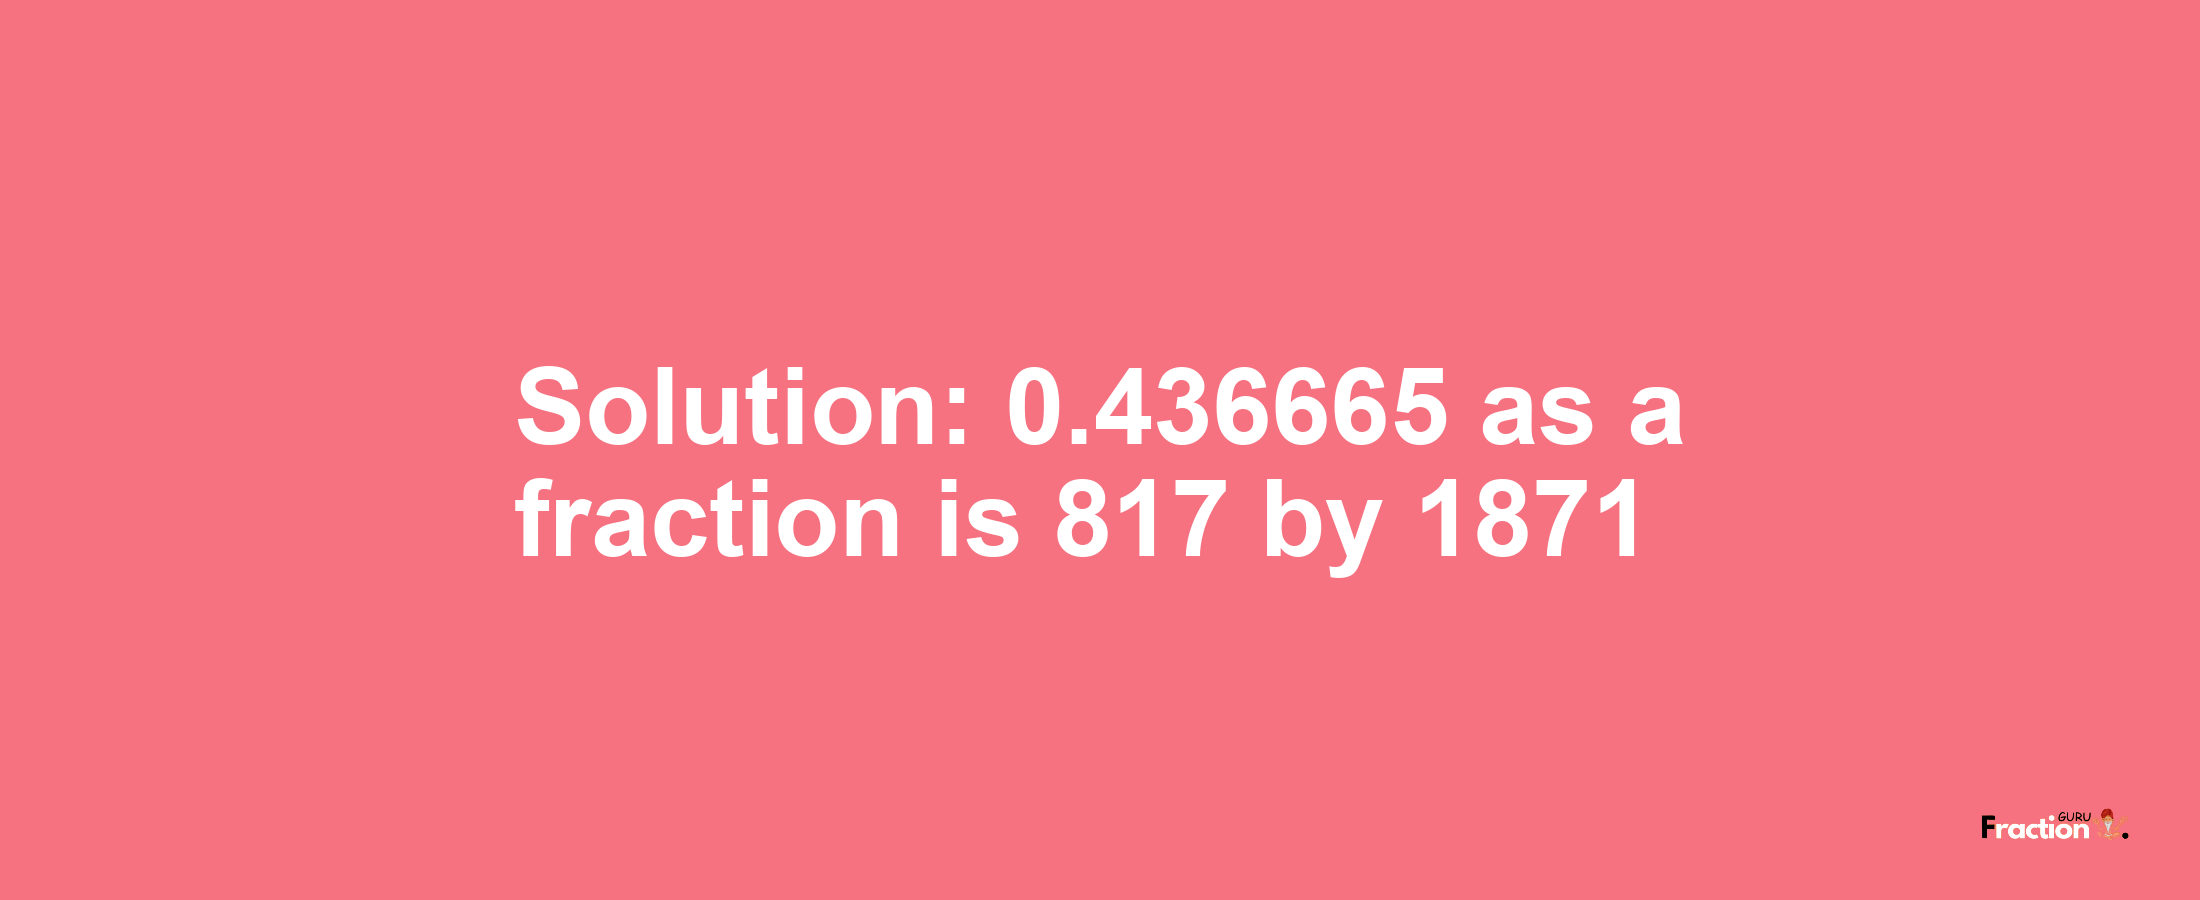 Solution:0.436665 as a fraction is 817/1871